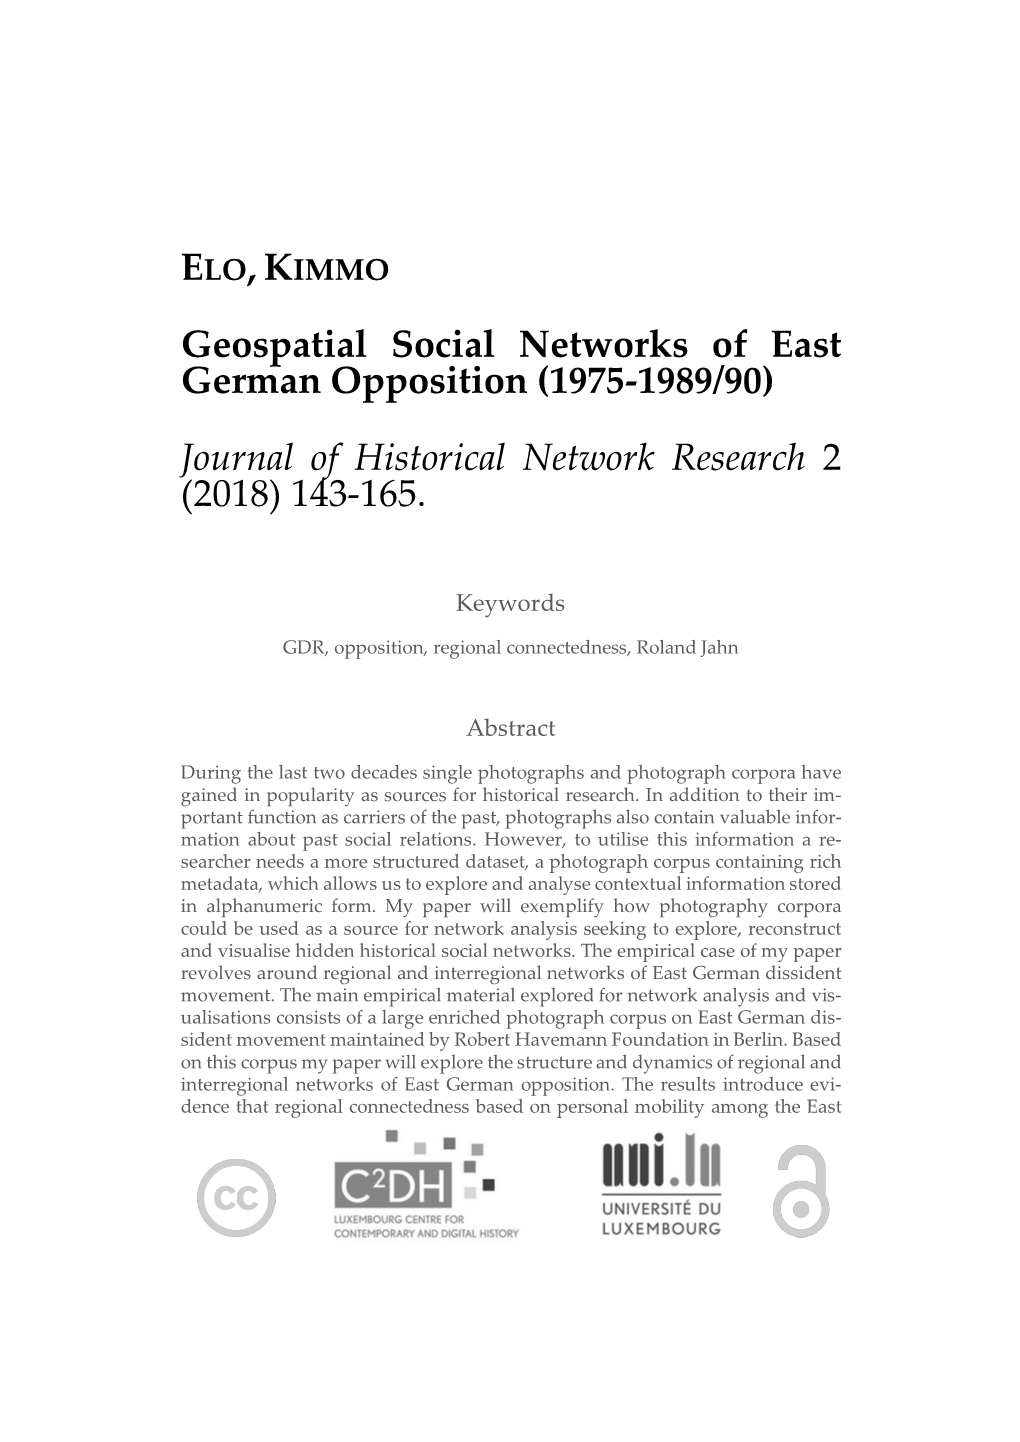 Geospatial Social Networks of East German Opposition (1975-1989/90)